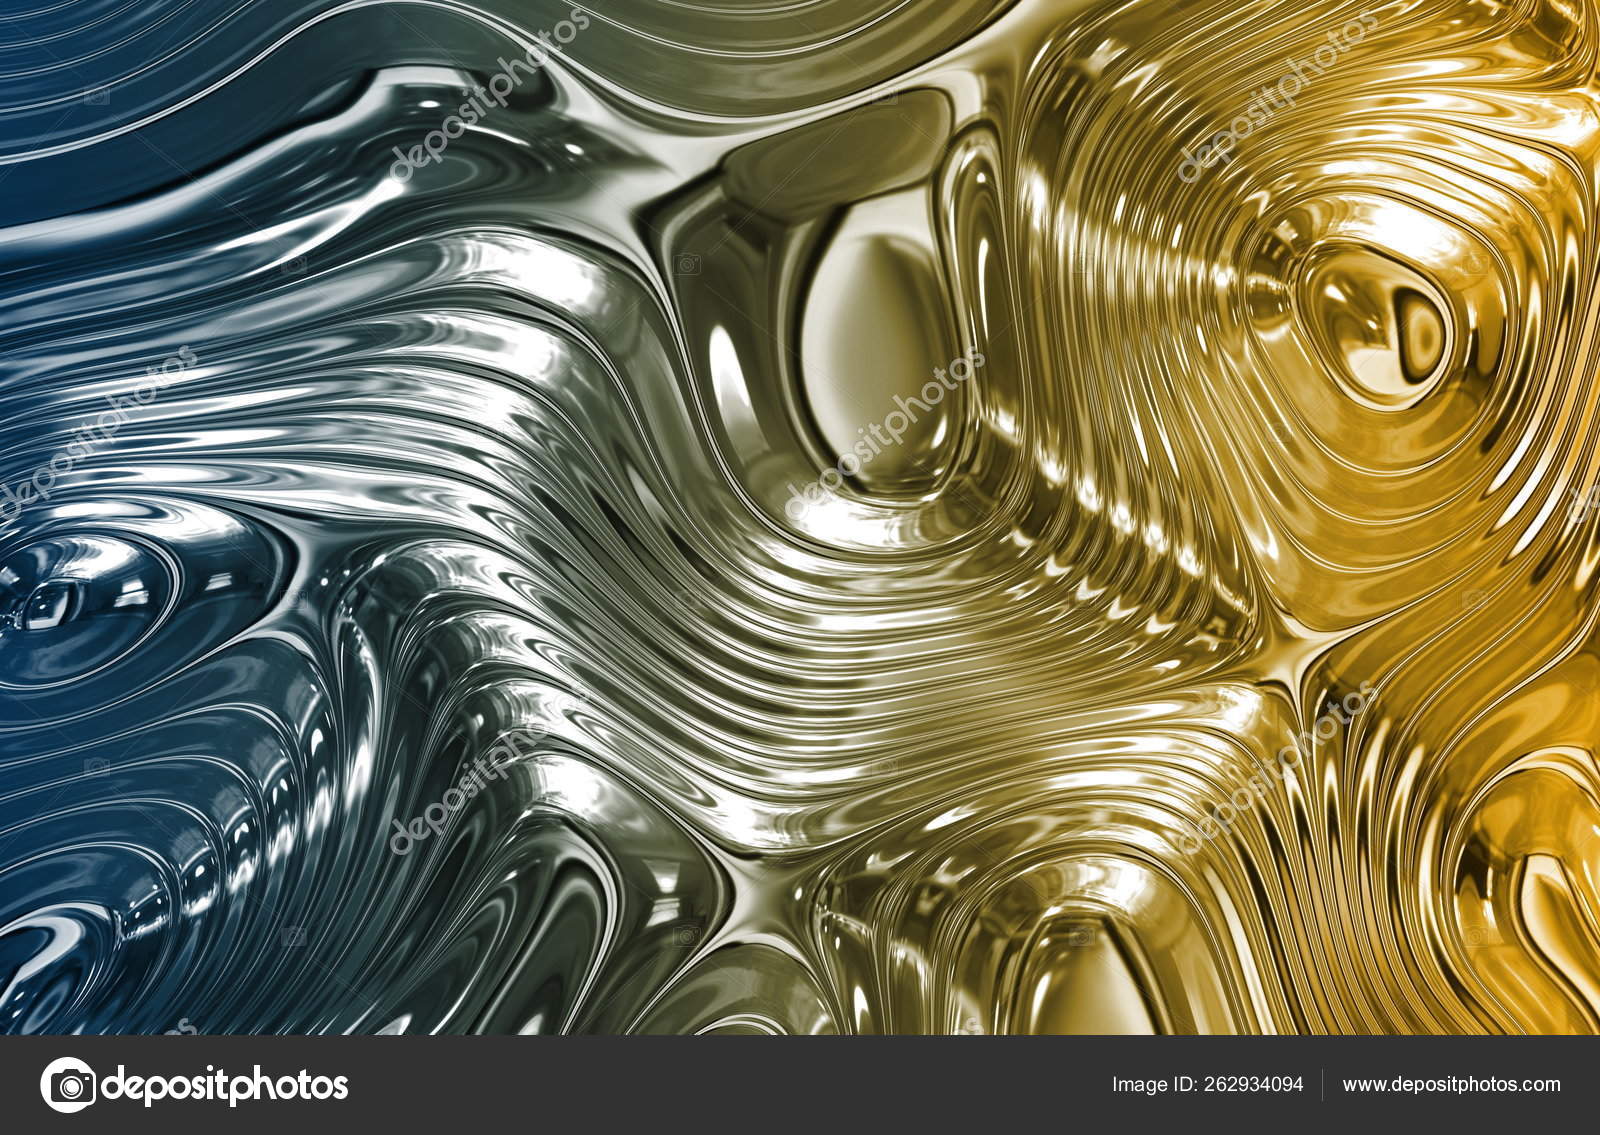 Clean Gold Texture Background Illustration Stock Photo - Download